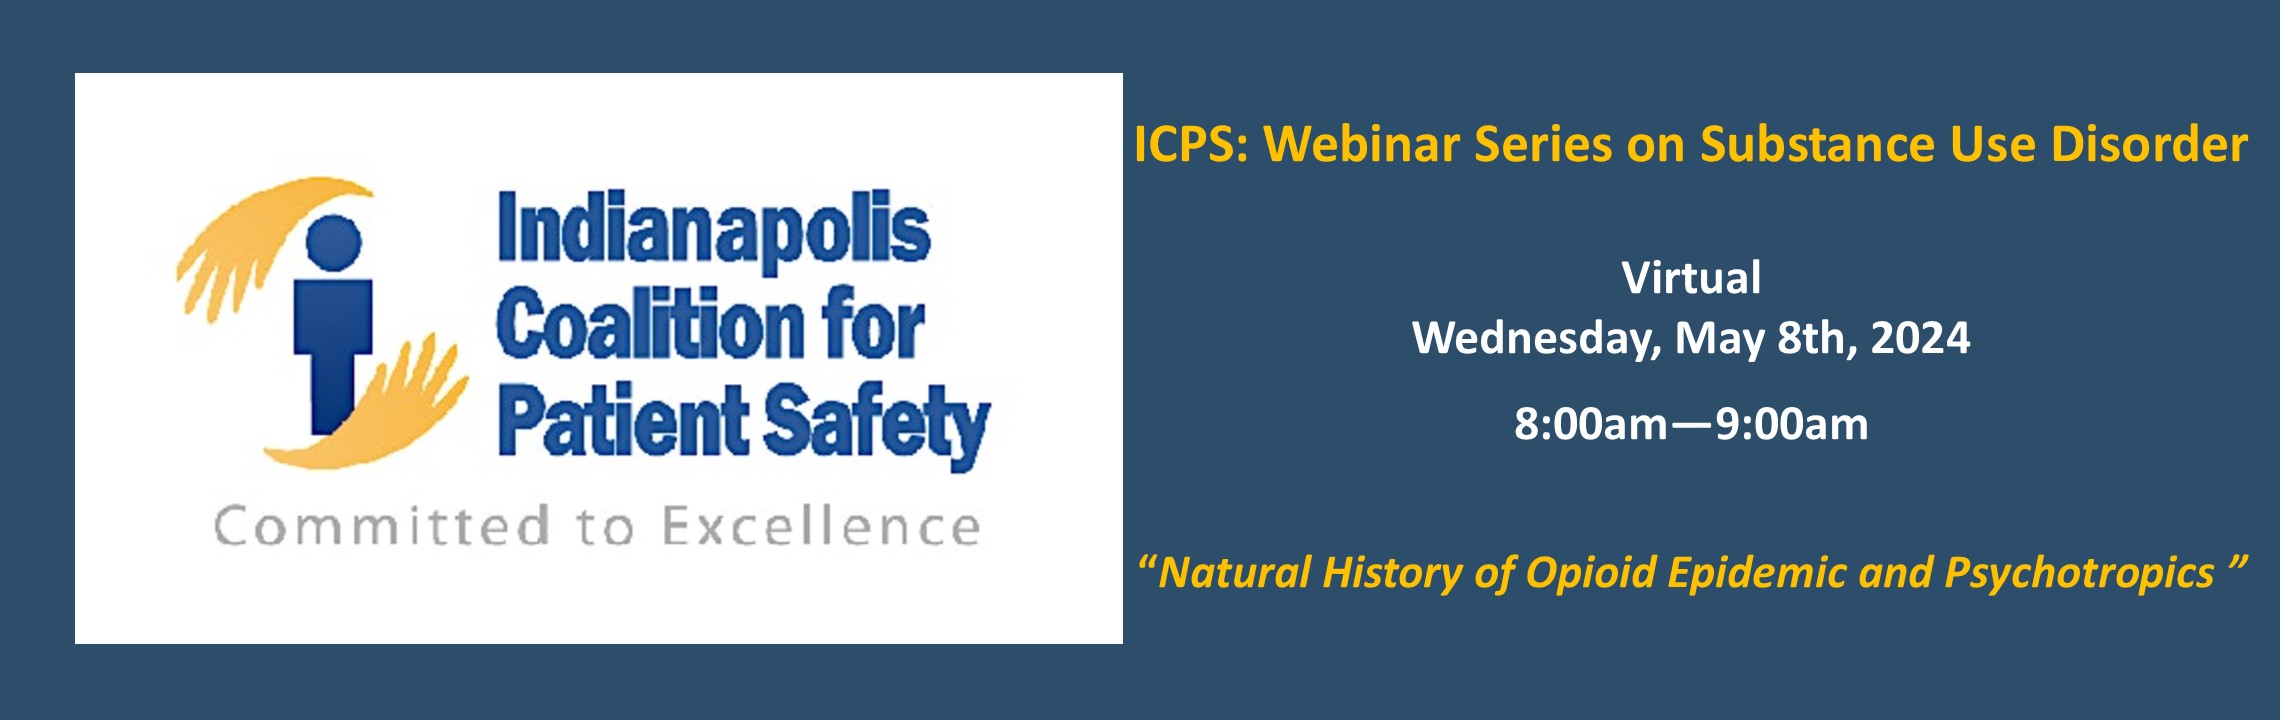 ICPS: Webinar Series on Substance Use Disorder Banner